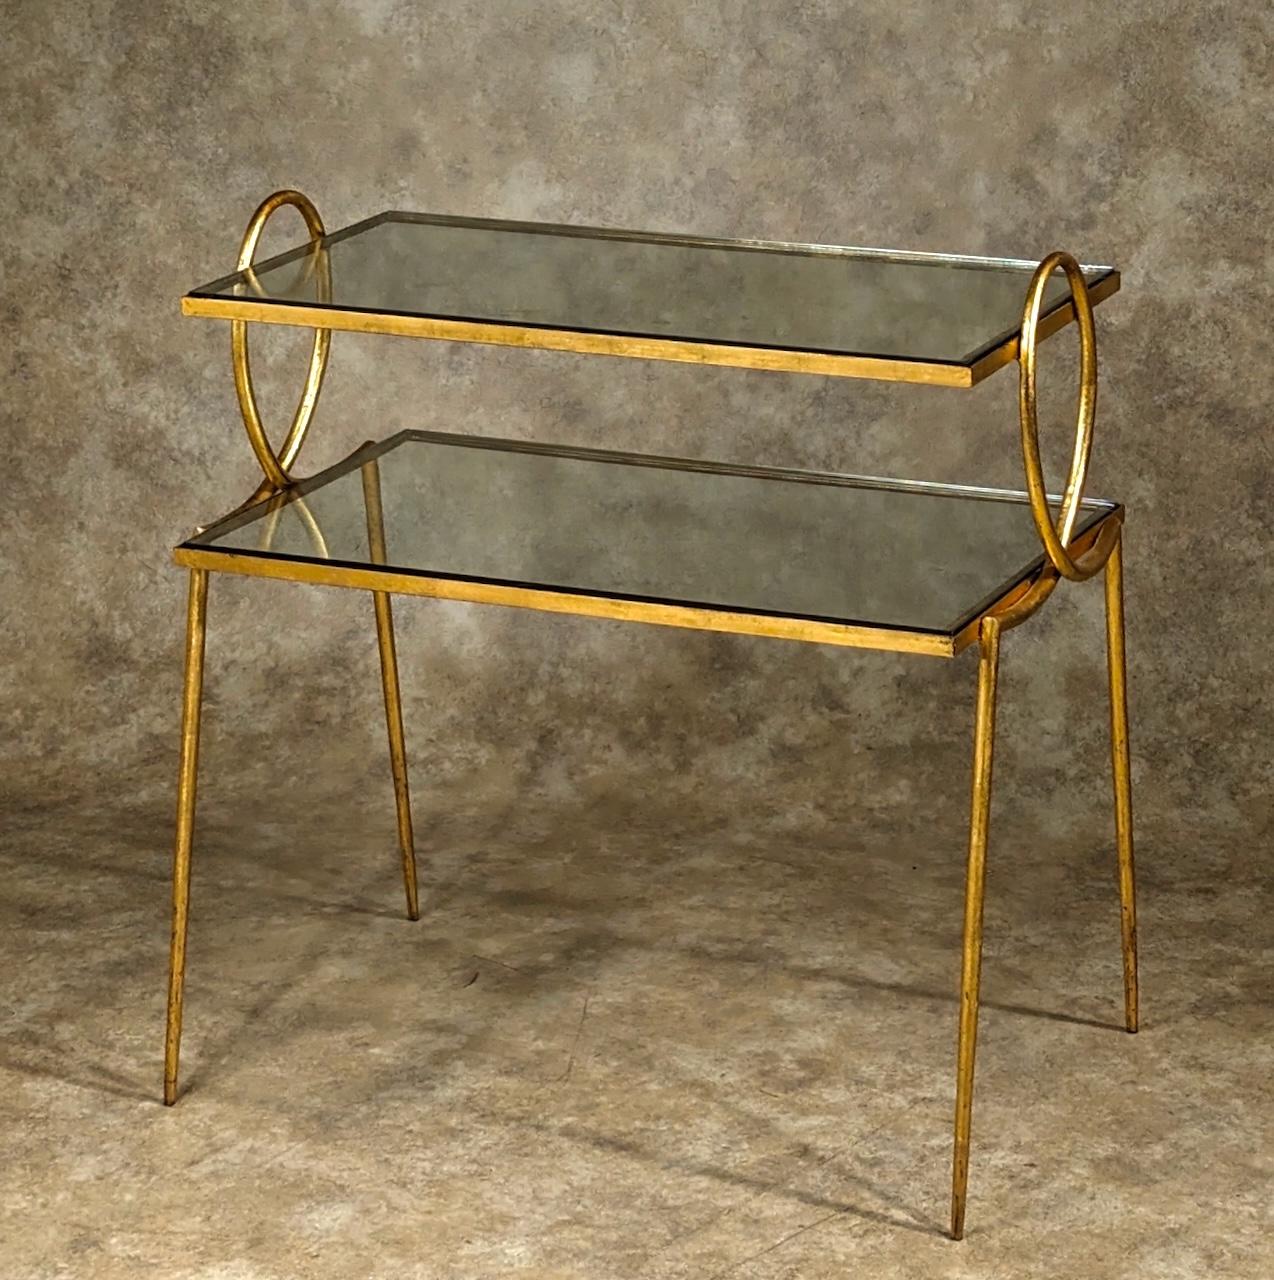 French Forties Art Deco two-tiered table by Rene Prou, 1949, in gilt forged iron with glass insets. This model is pictured in Maison Francaise, November 1949. Please see photos. 28.5” wide x 16.5” deep x 30” high to top of loop. 28” high to top